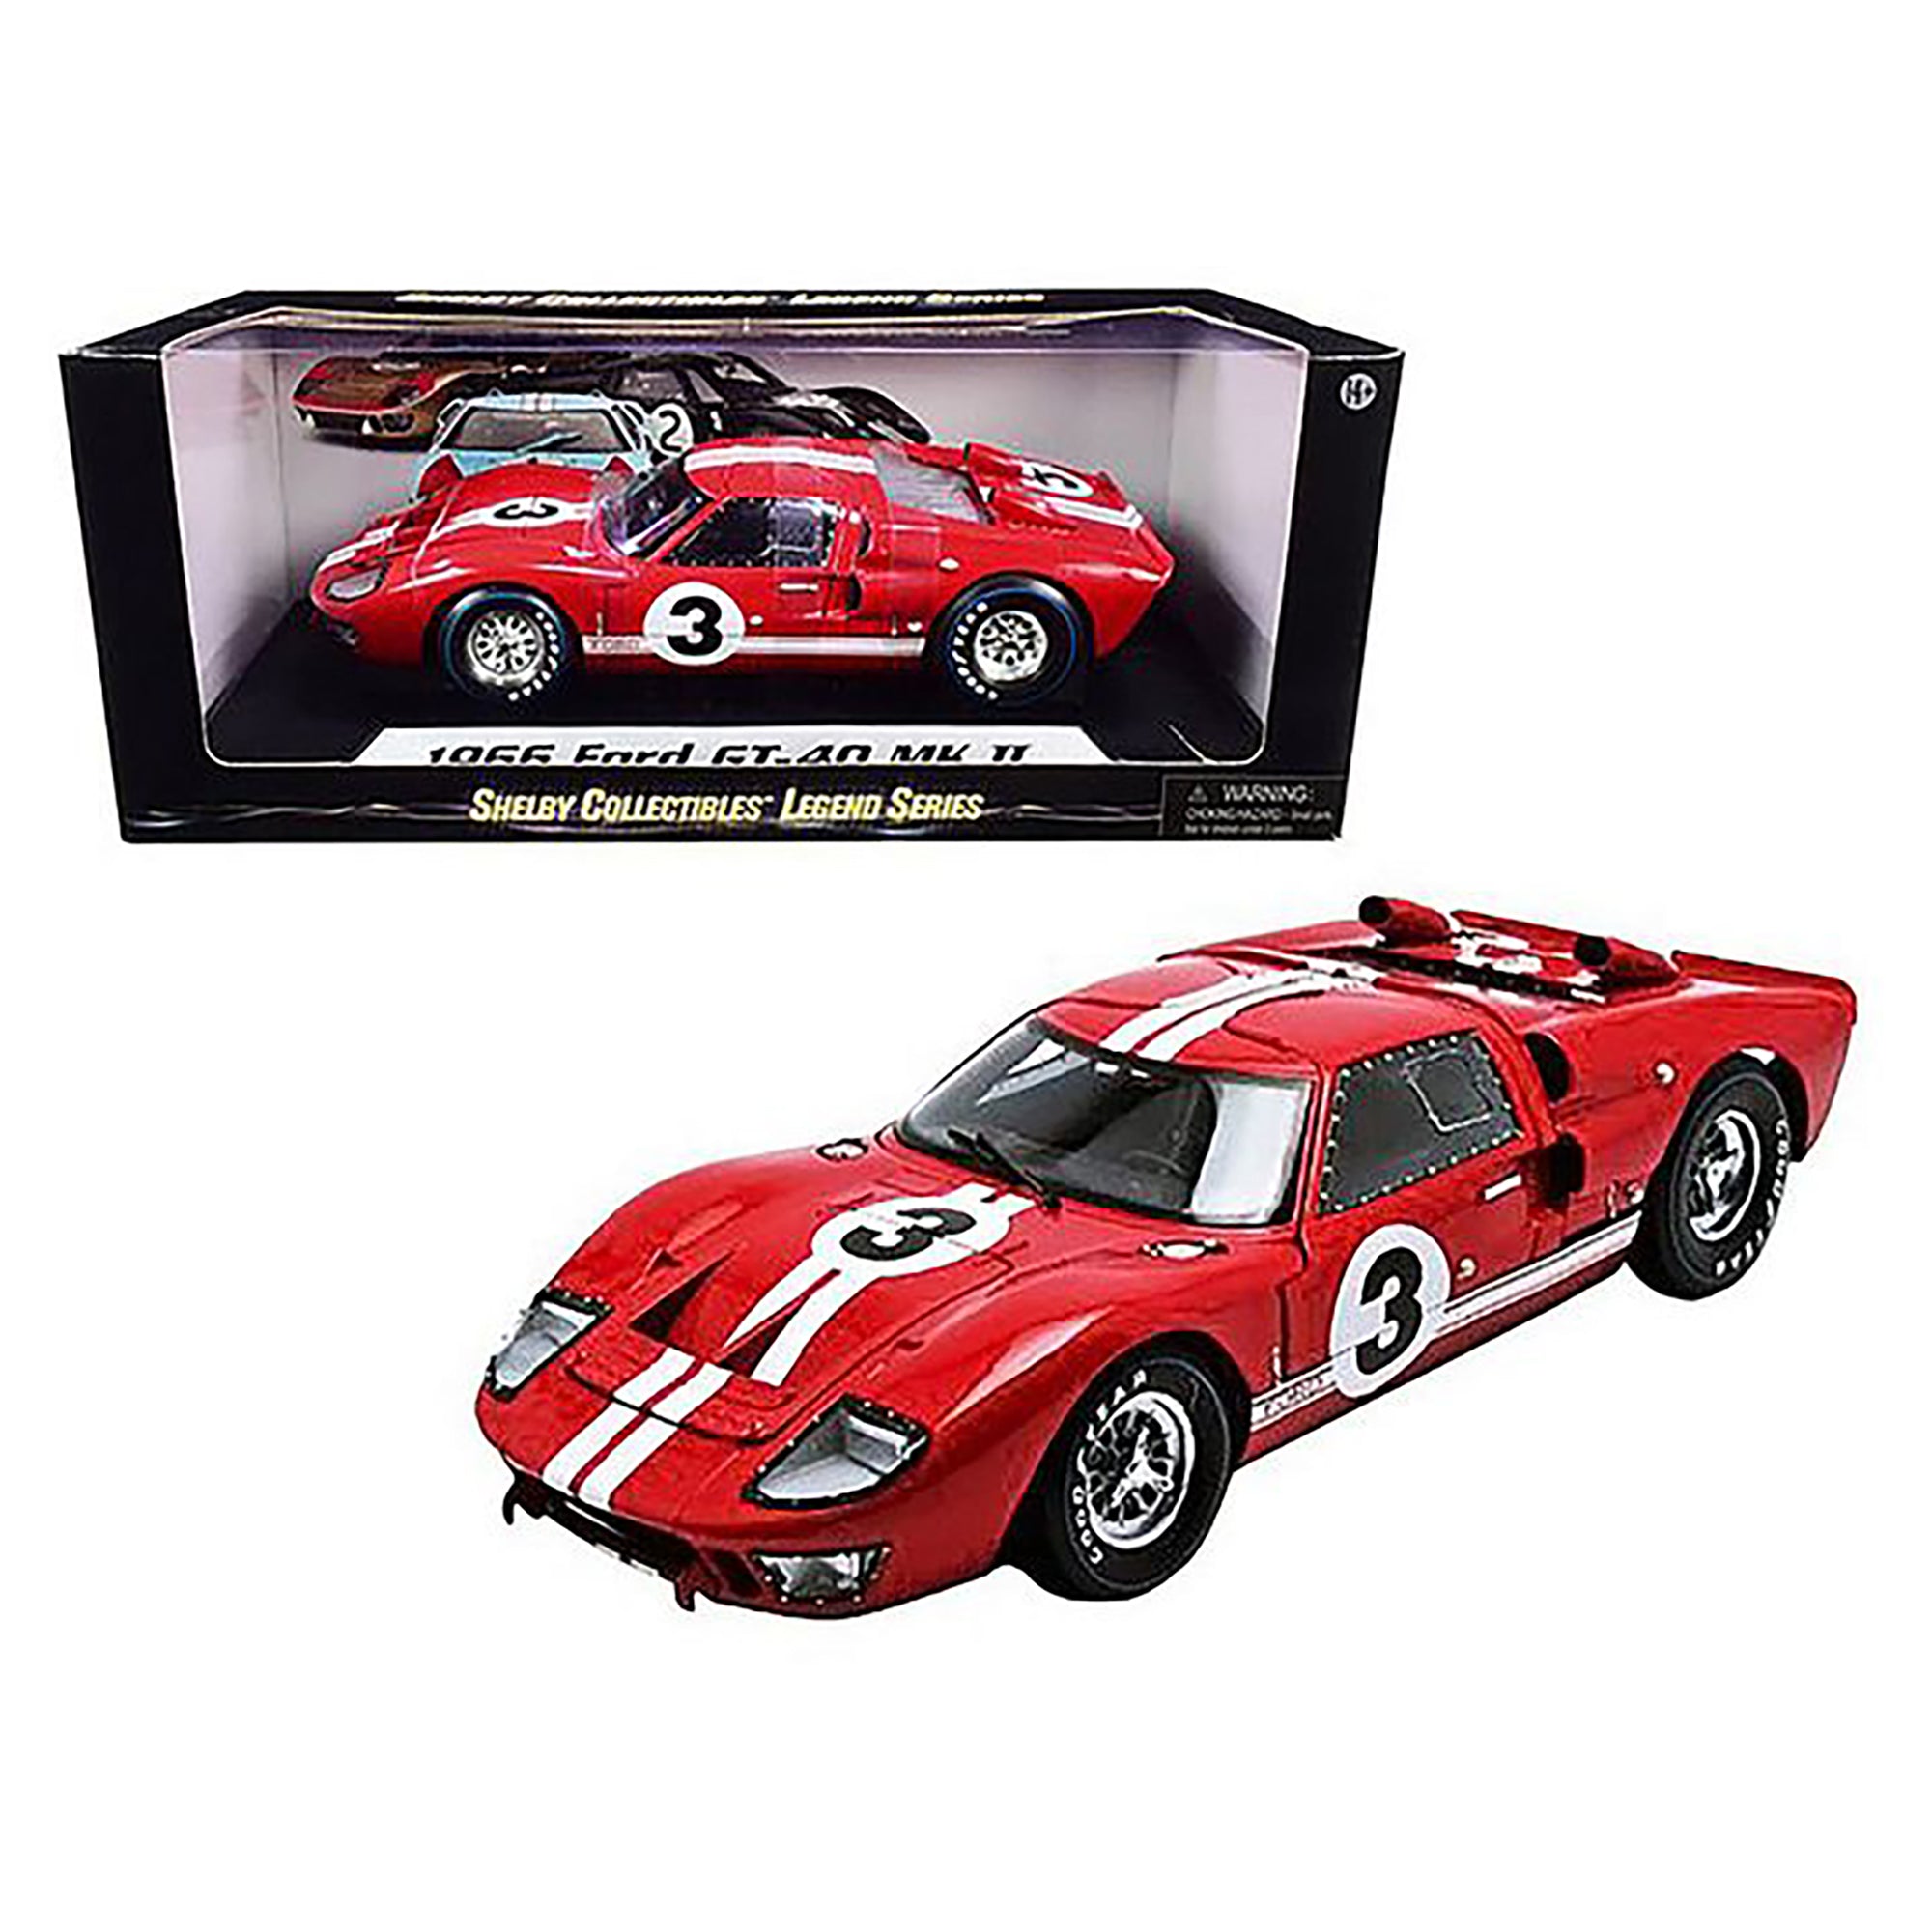 Shelby Collect 1966 Ford GT-40 MK II #1 1:18 Diecast Vehicle